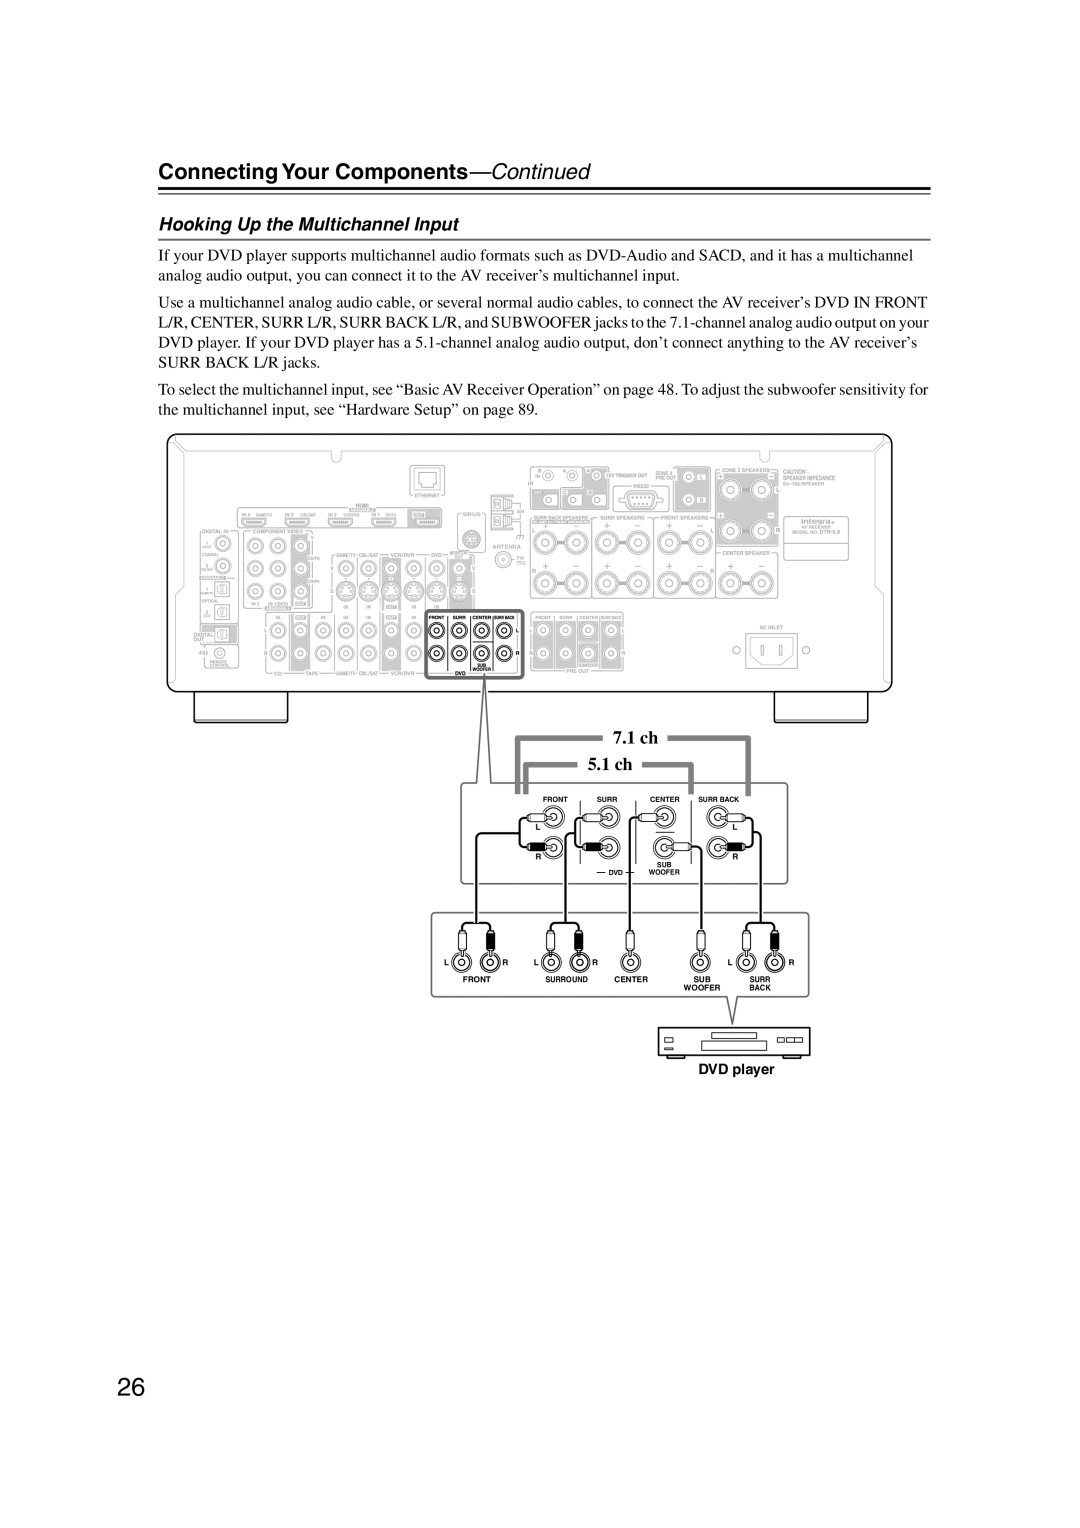 Integra DTR-5.9 instruction manual Hooking Up the Multichannel Input, Connecting Your Components—Continued, 7.1ch 5.1ch 